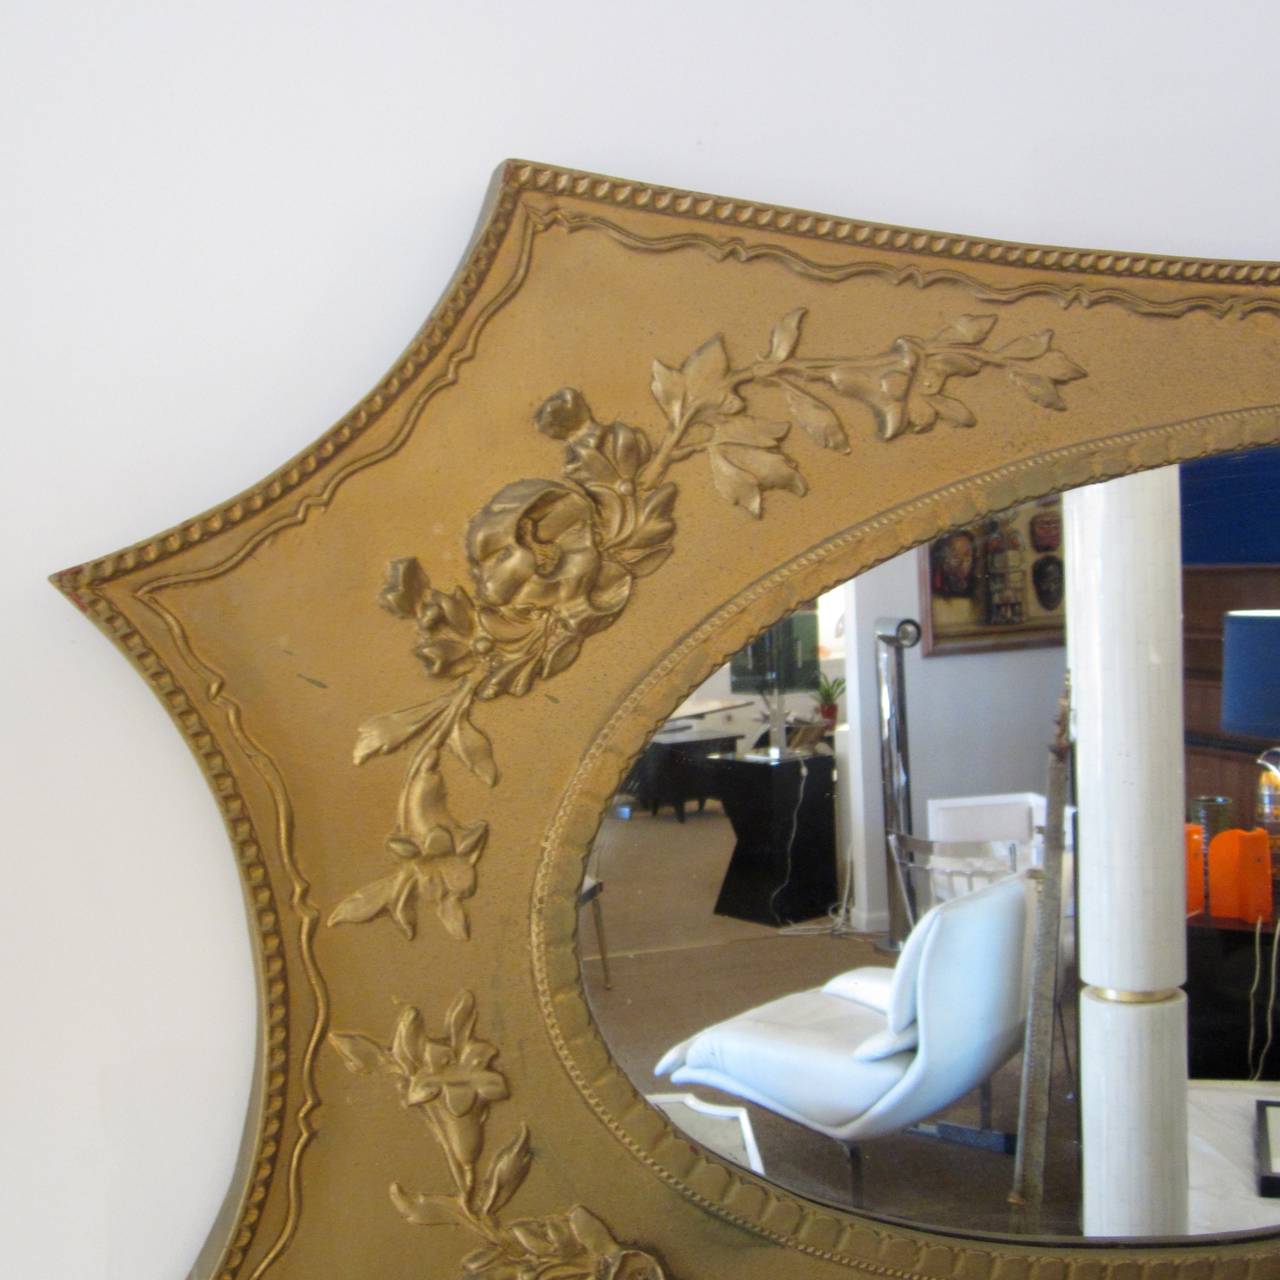 Lovely original gold painted wood frame mirror with carved detail and beaded border design.